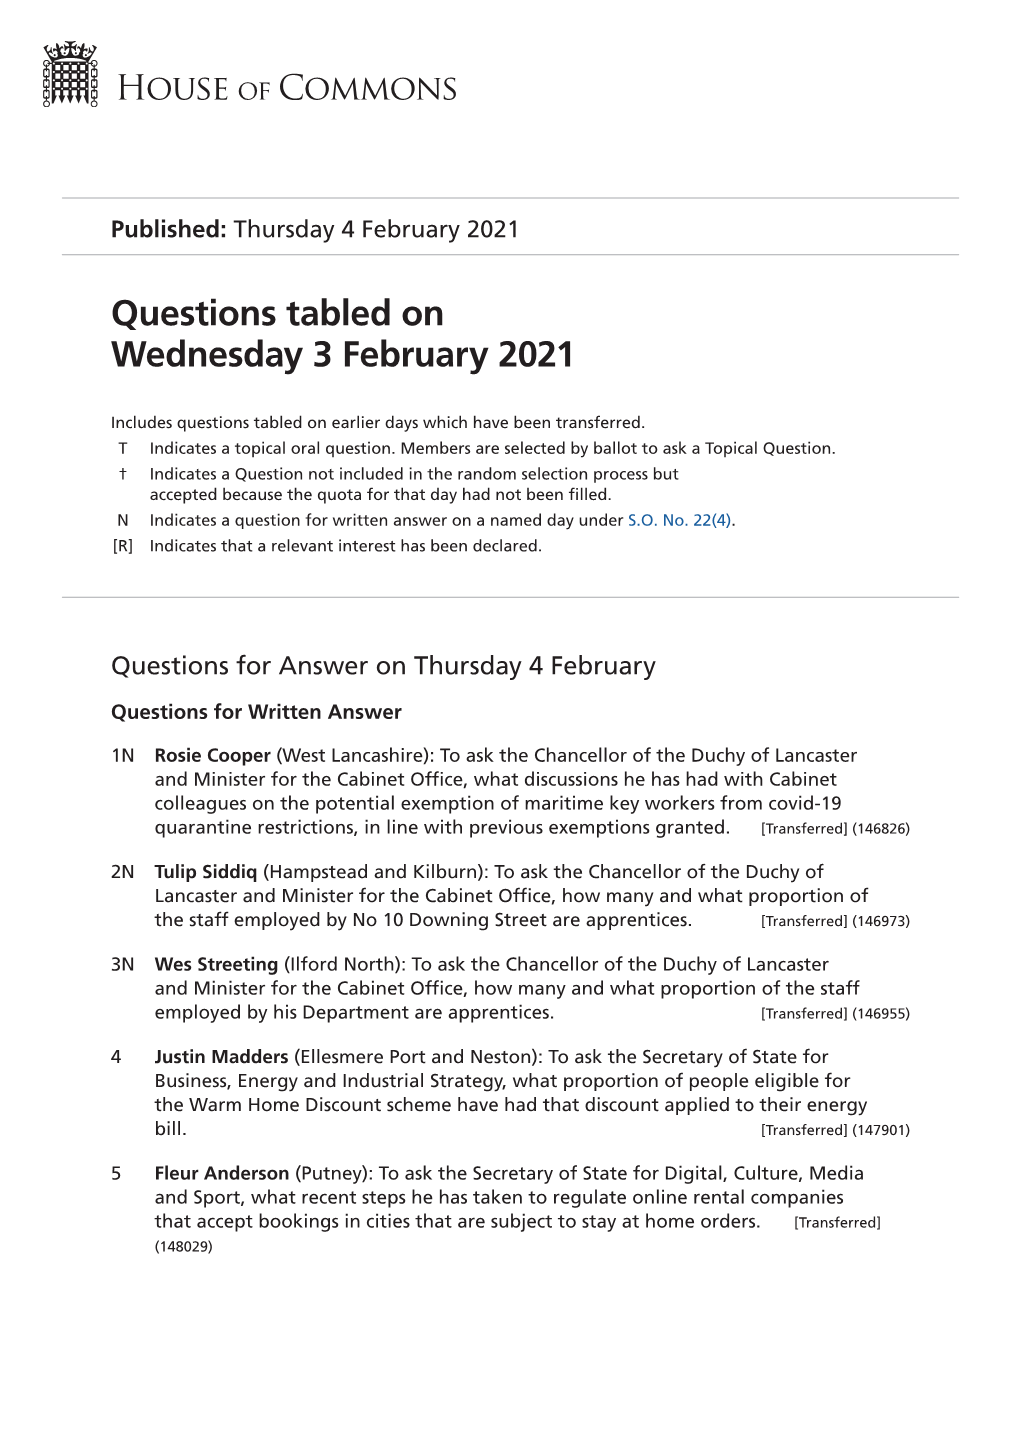 View Questions Tabled on PDF File 0.16 MB